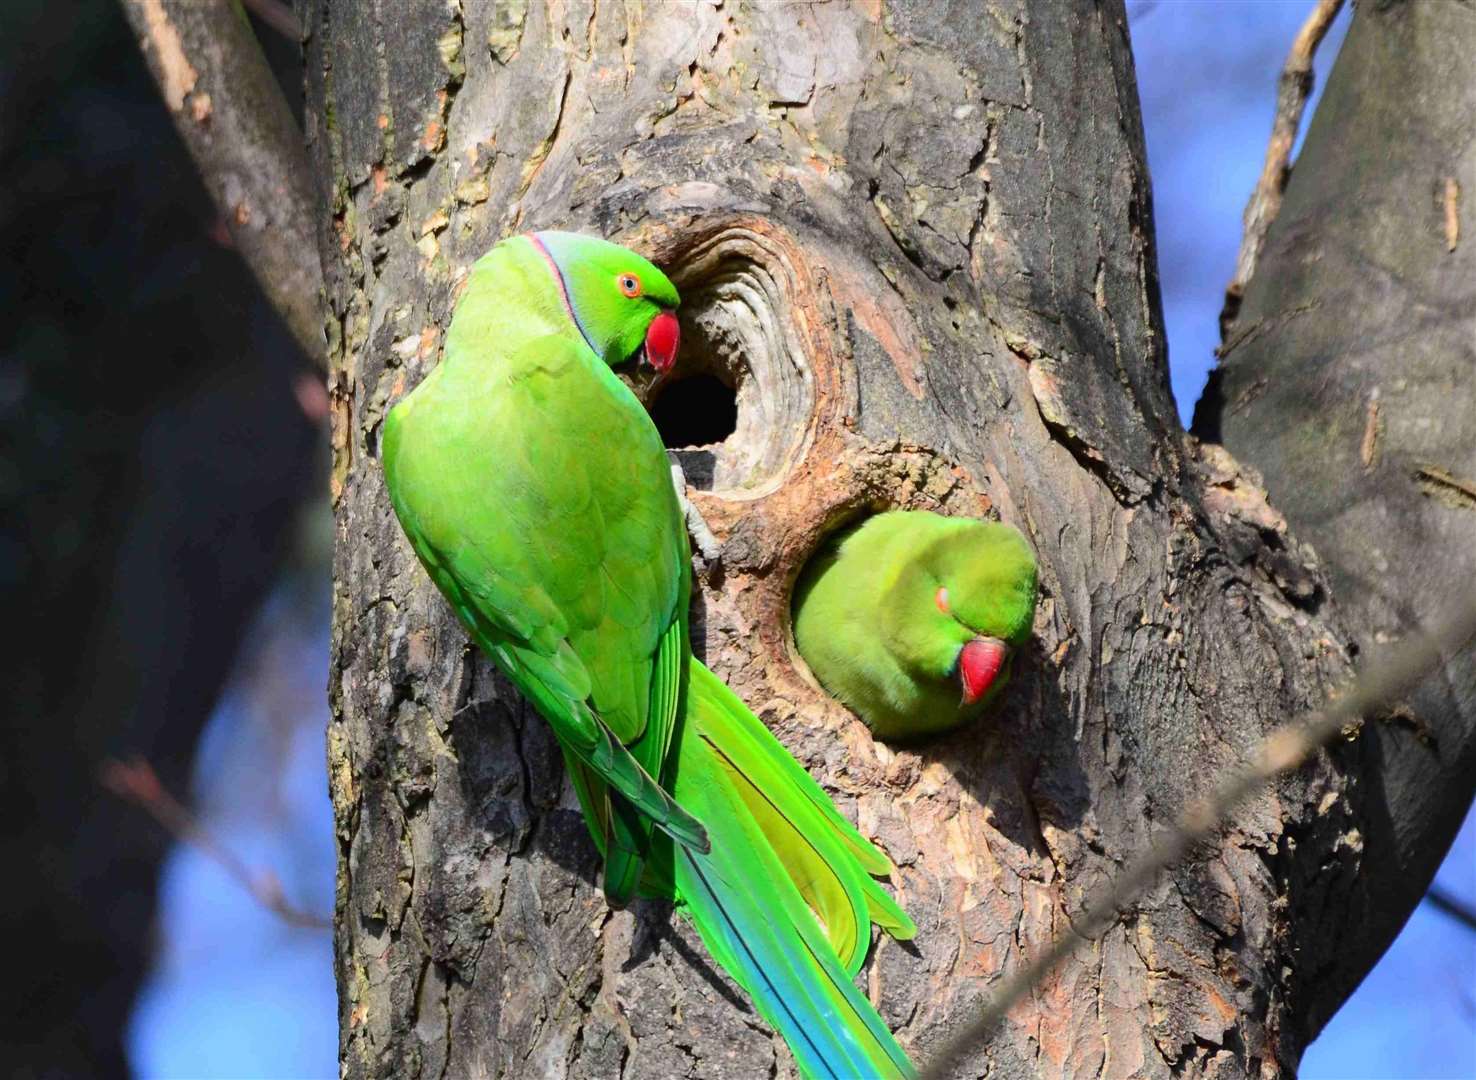 Rose-ringed parakeets - a common sight around Thanet